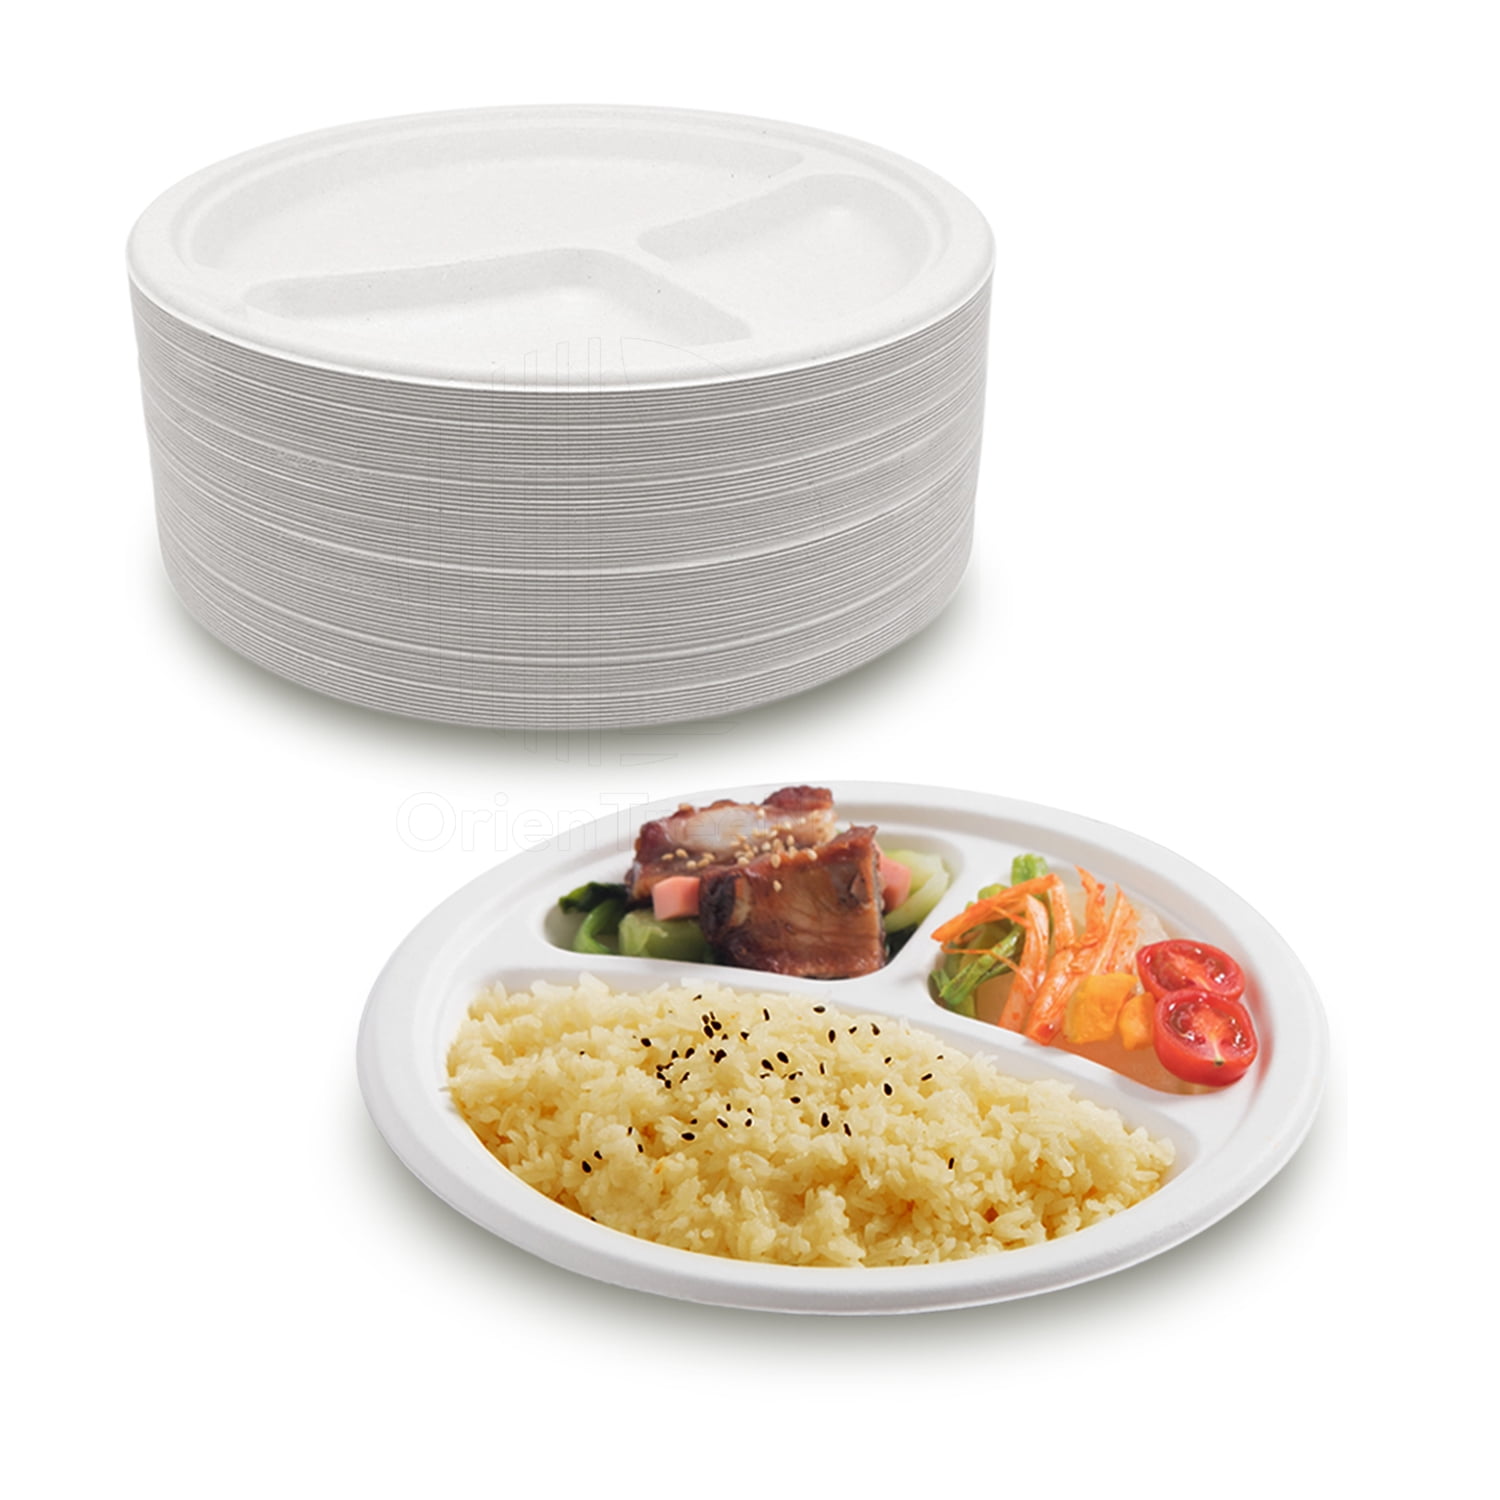 Chinet® Paper Plates, 8-3/4 White, 125/Pack, 4/CT